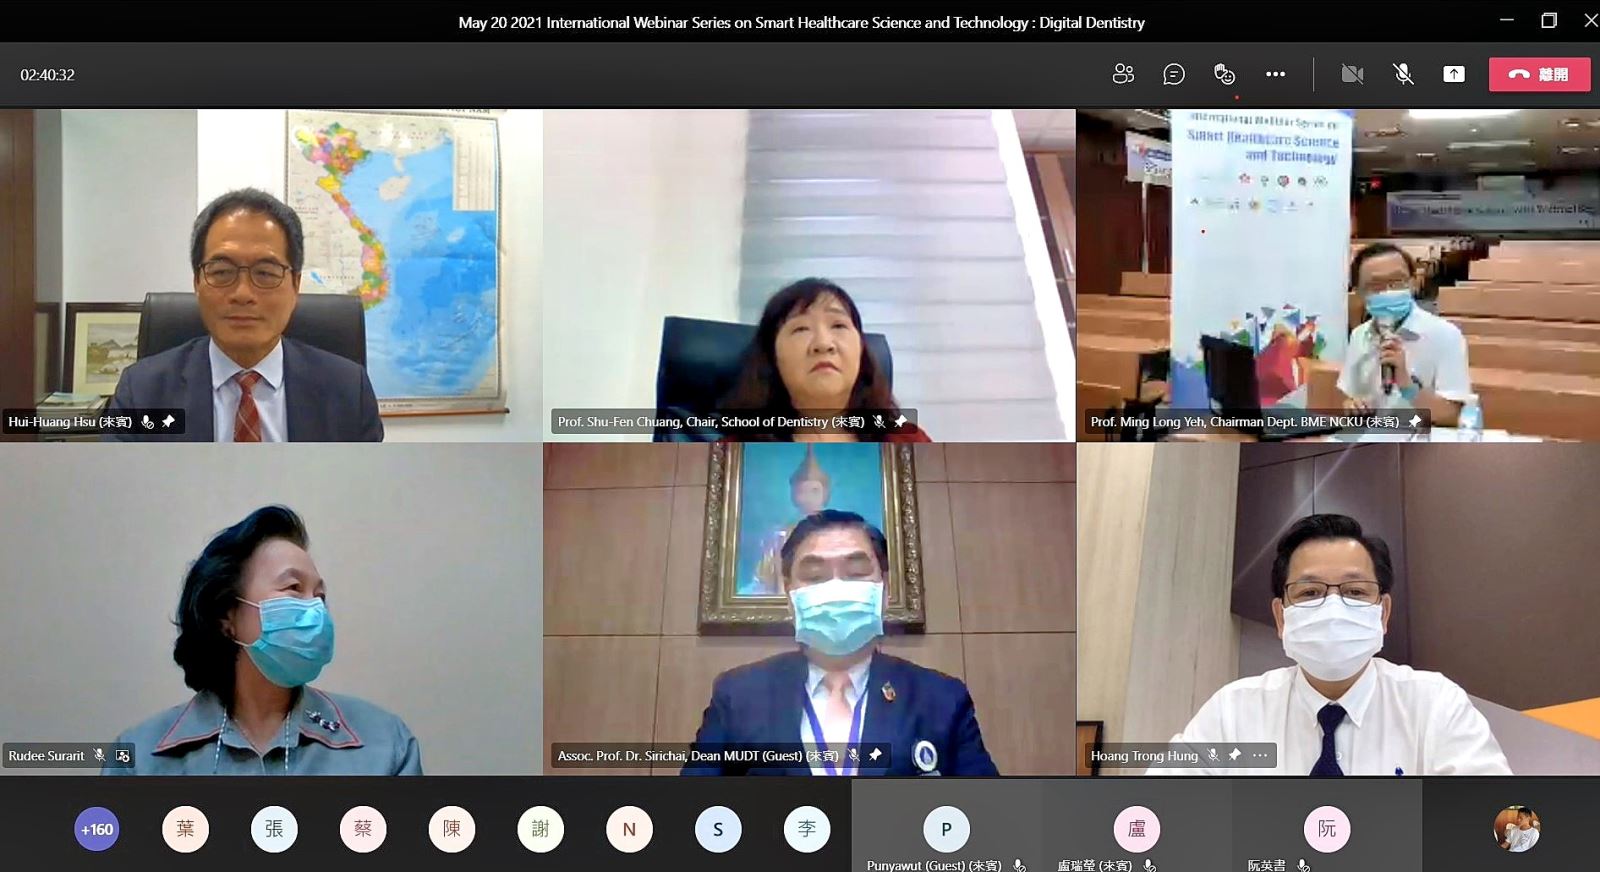 Taiwan and Thailand exchanged ideas about the trends of digital dentistry around the world